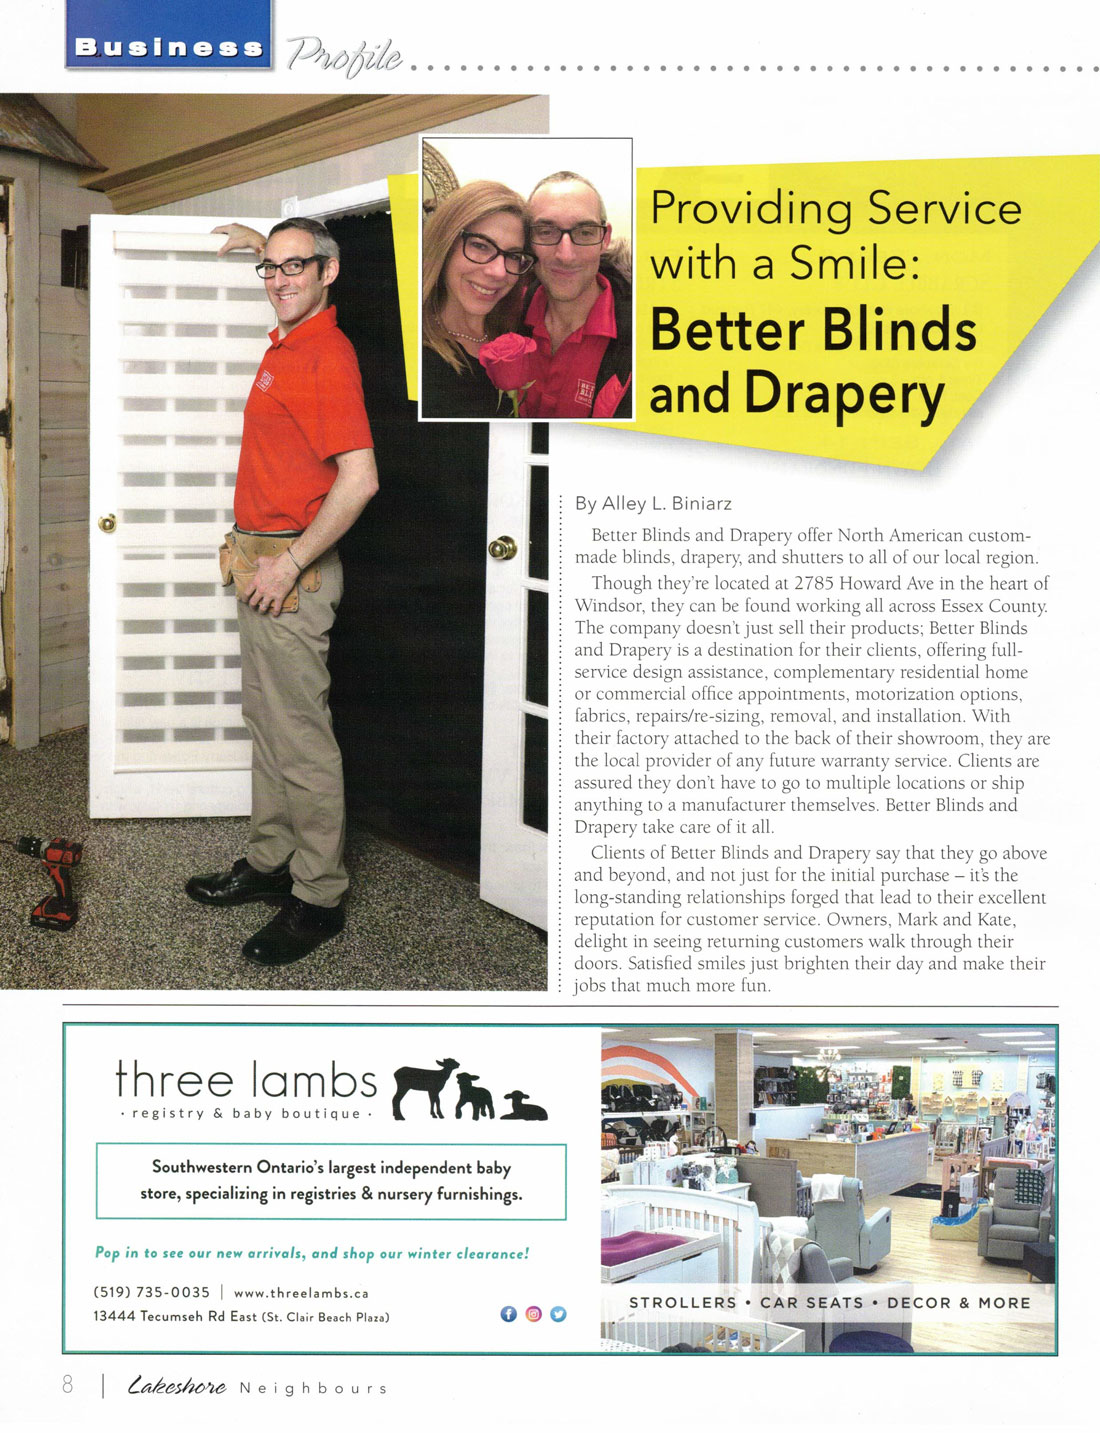 Providing Service with a Smile: Better Blinds and Drapery